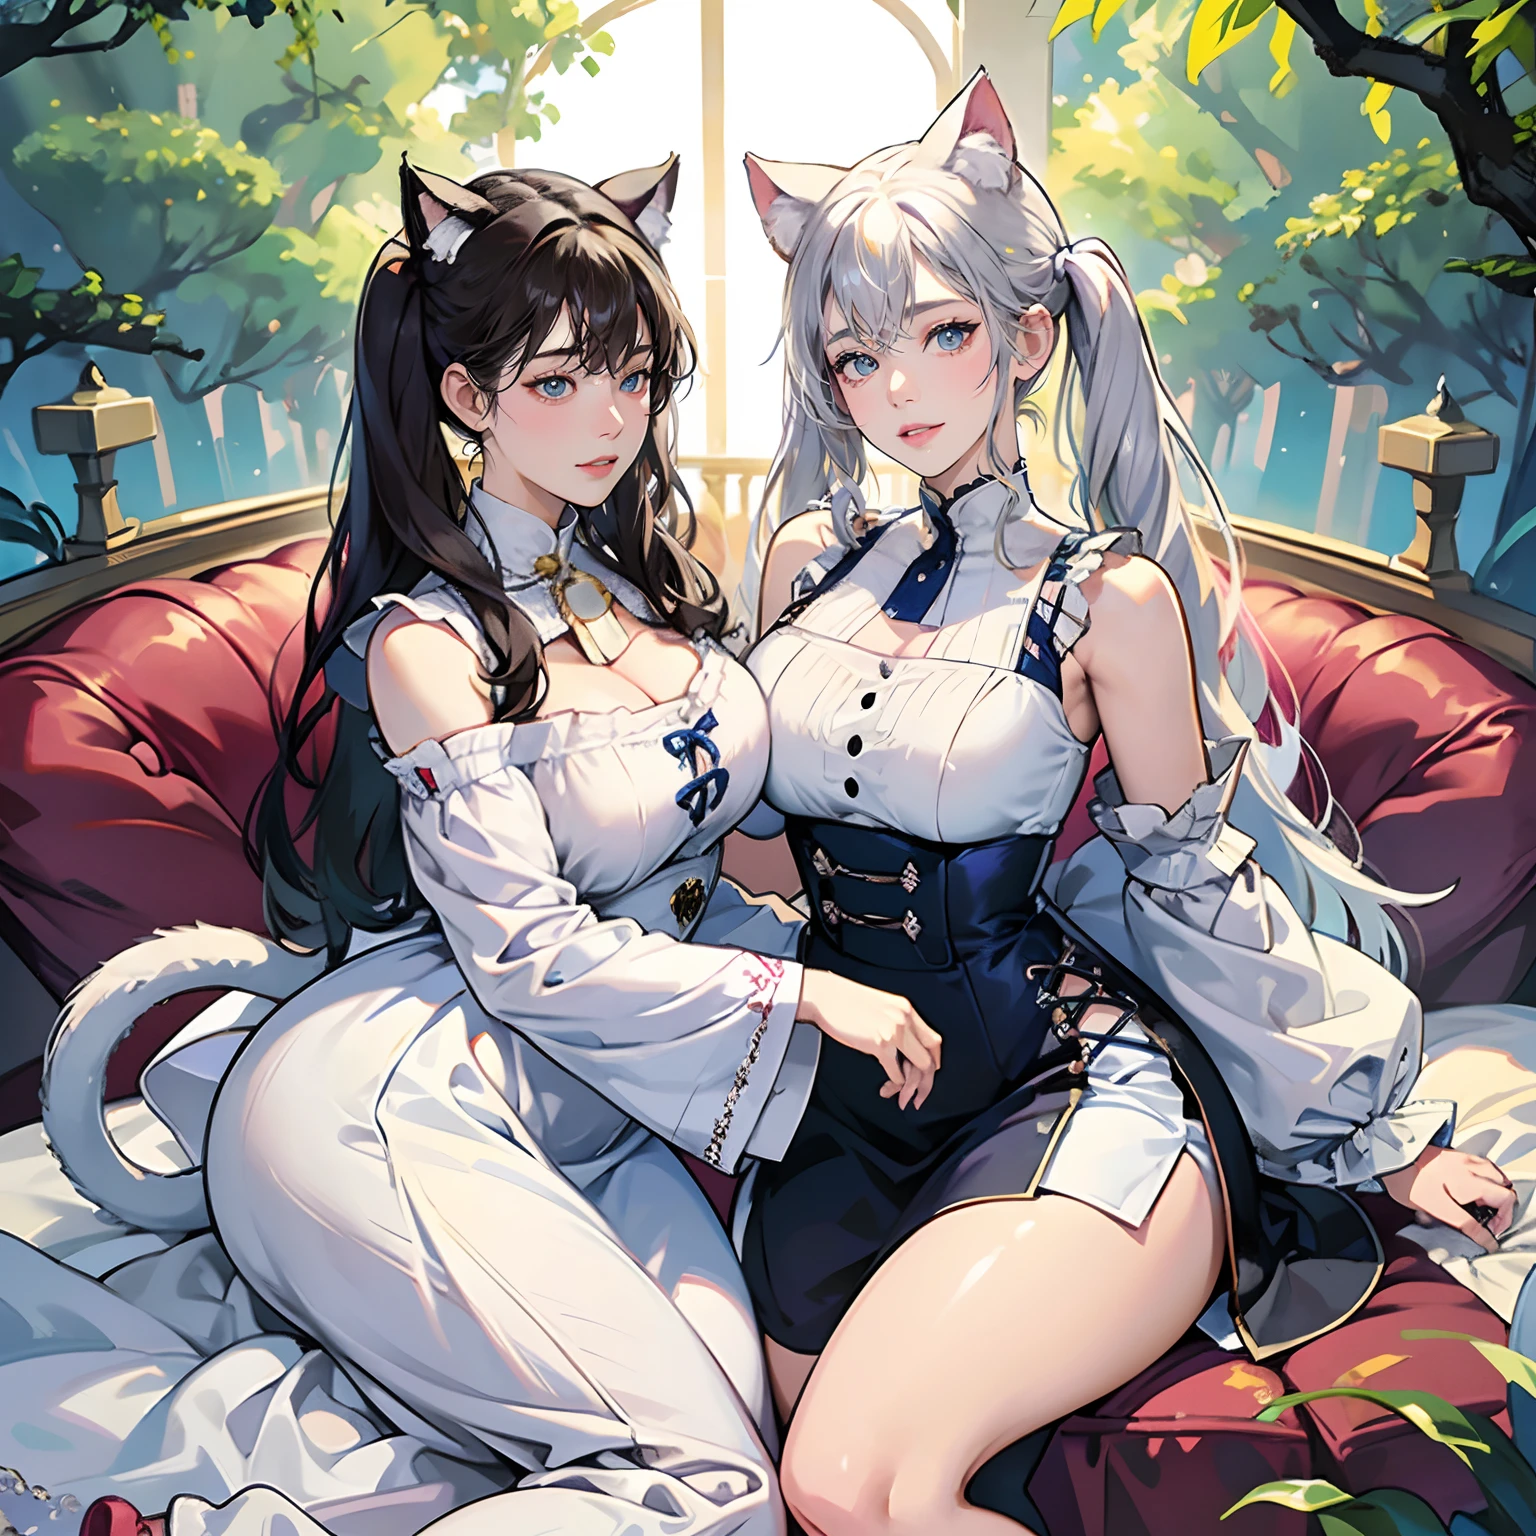 Women in Their 20s、2 females:2.0、offcial art, unity 8k wall paper, ultra-detailliert, beautifly、Aesthetic, ​masterpiece, top-quality, Photorealsitic、Cat-eared clan、Cat's ears、very thick tail:1.5、very thick and long tail、azure eyes、Silver-white hair、shorth hair、Pigtail hairstyle:1.8、Collar with bell:2.0、Blue Apron Dress、depth of fields, Fantastic atmosphere, Calm palette, tranquil mood, Soft shading、cobblestone road、Stone signpost、Rivers and bridges、Beautiful Landscapes、bbw、very large breast、plump figure、krystal、Cat's ears:1.8、Cat ears on the head、thick waist、thick thight、an legs